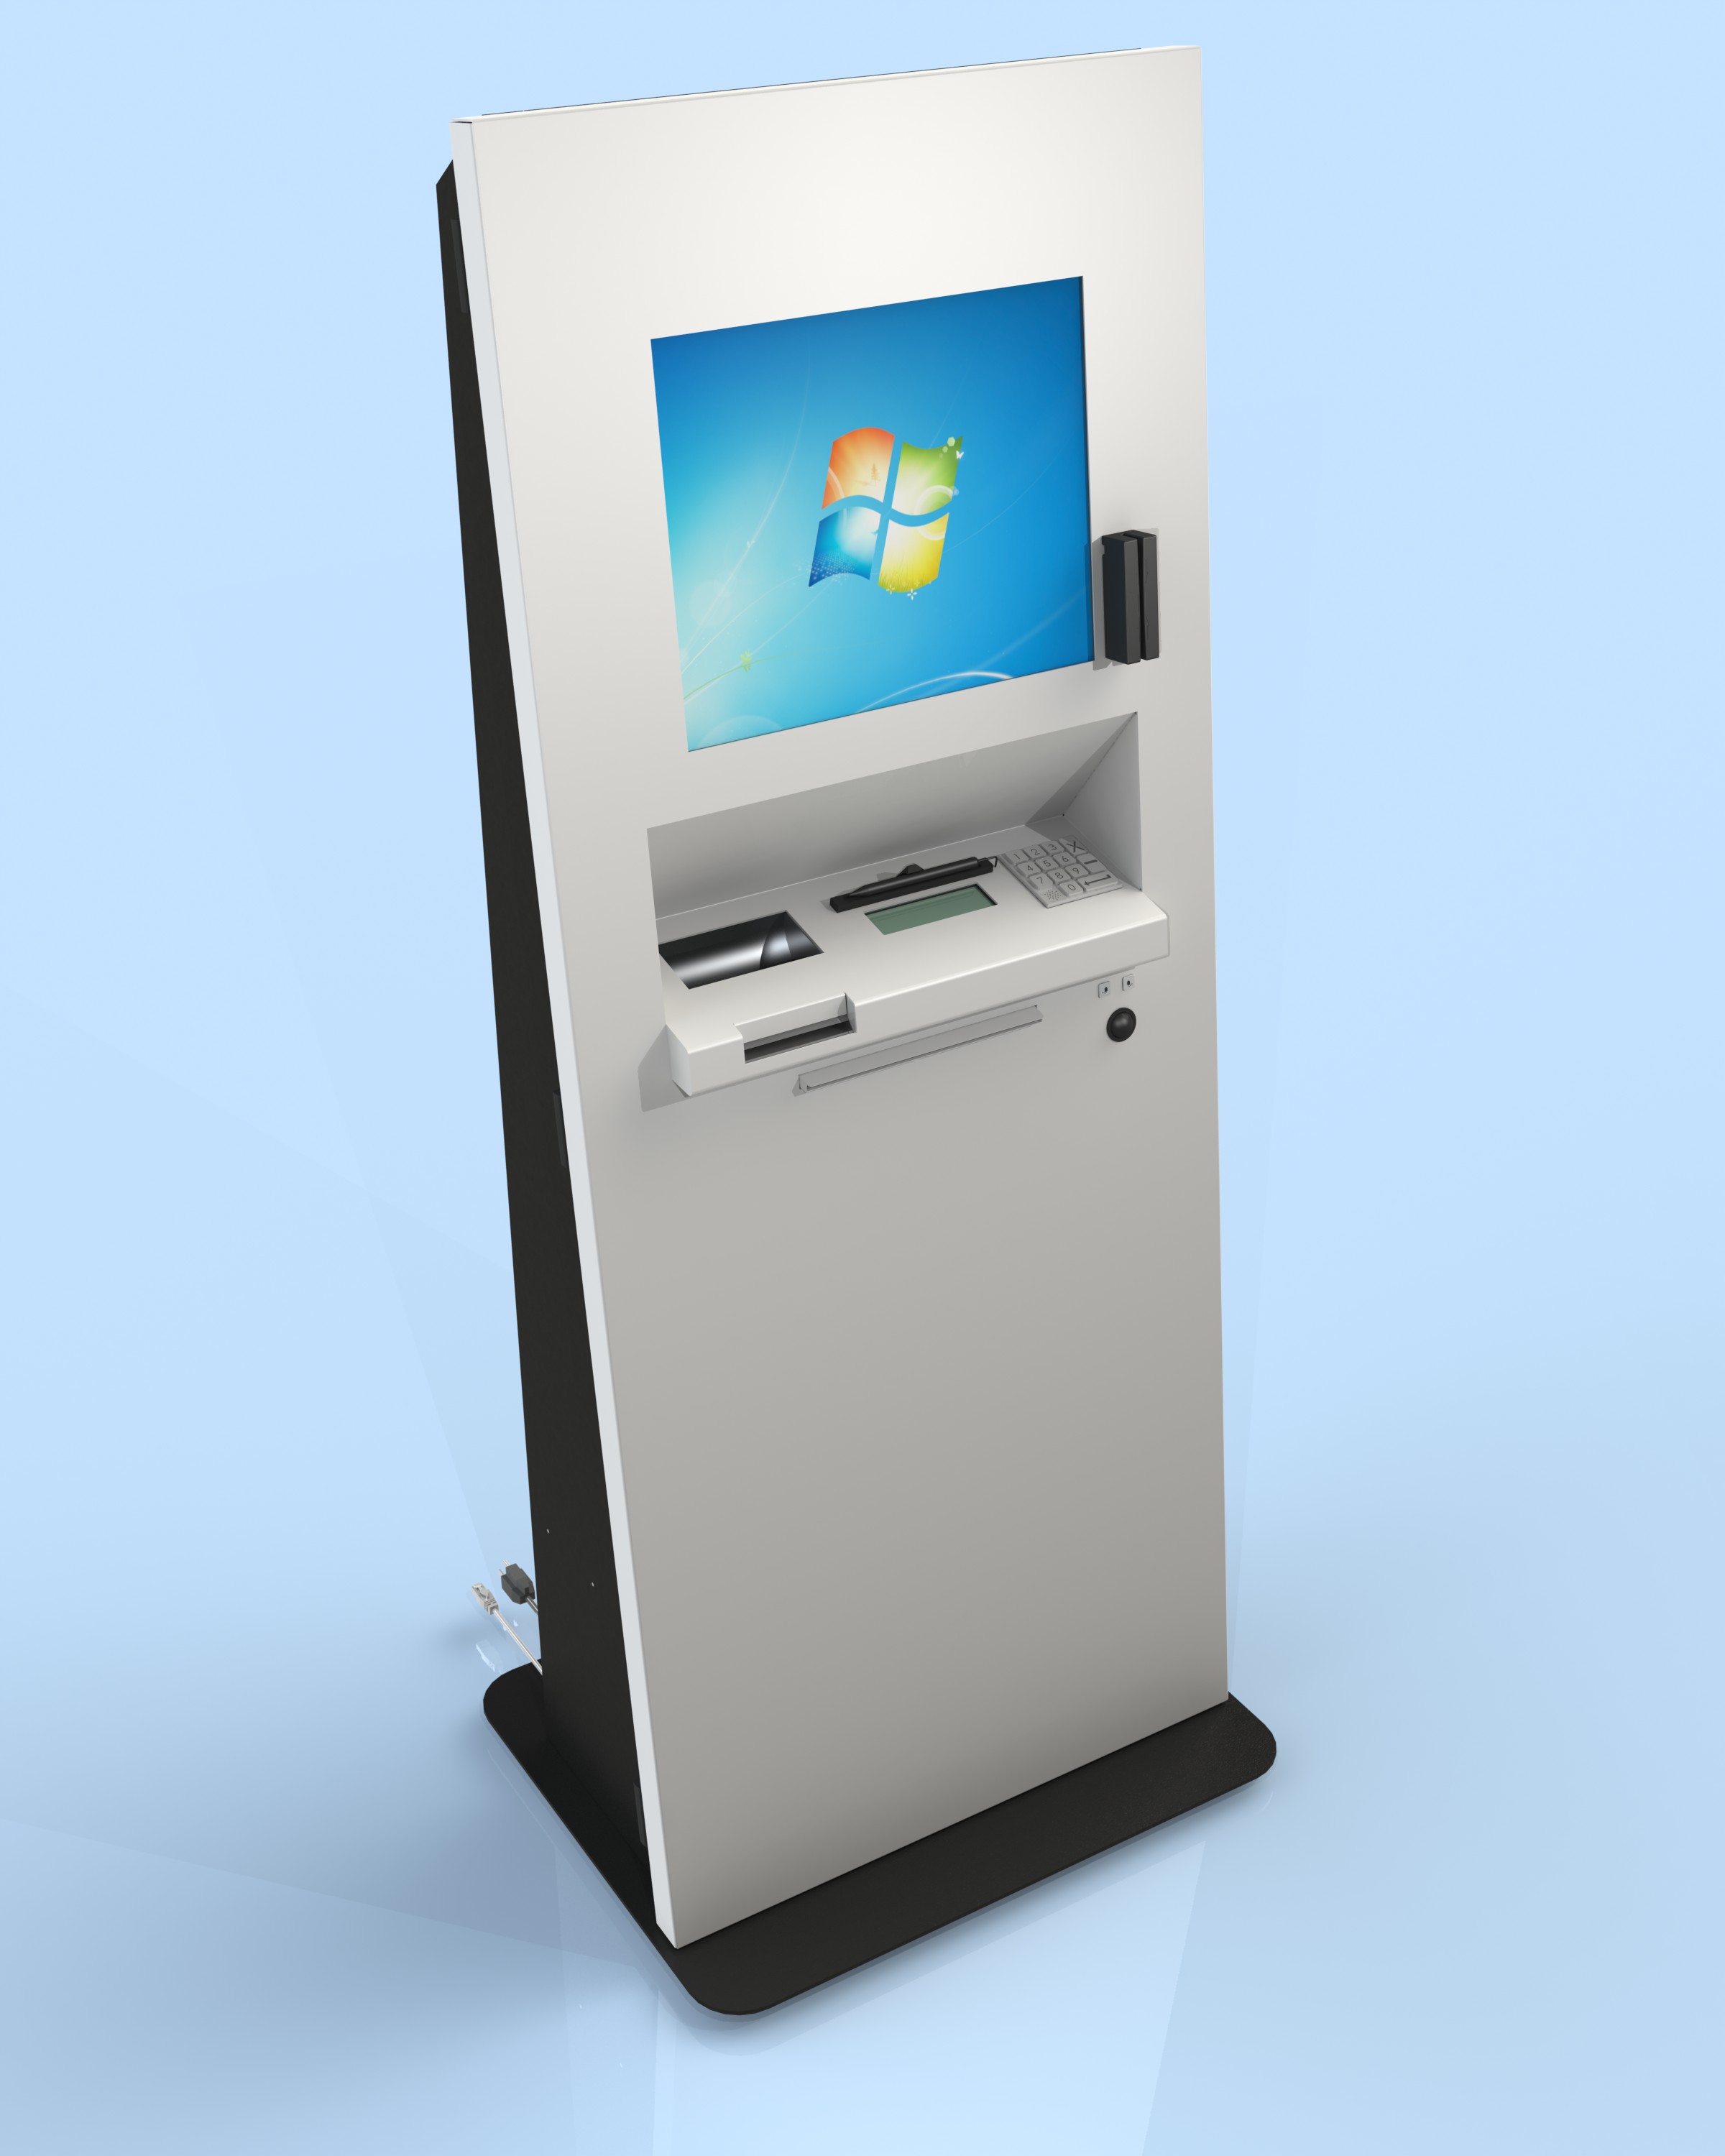 Comark to Introduce The New Versa Series Kiosks at the NRF Big Show